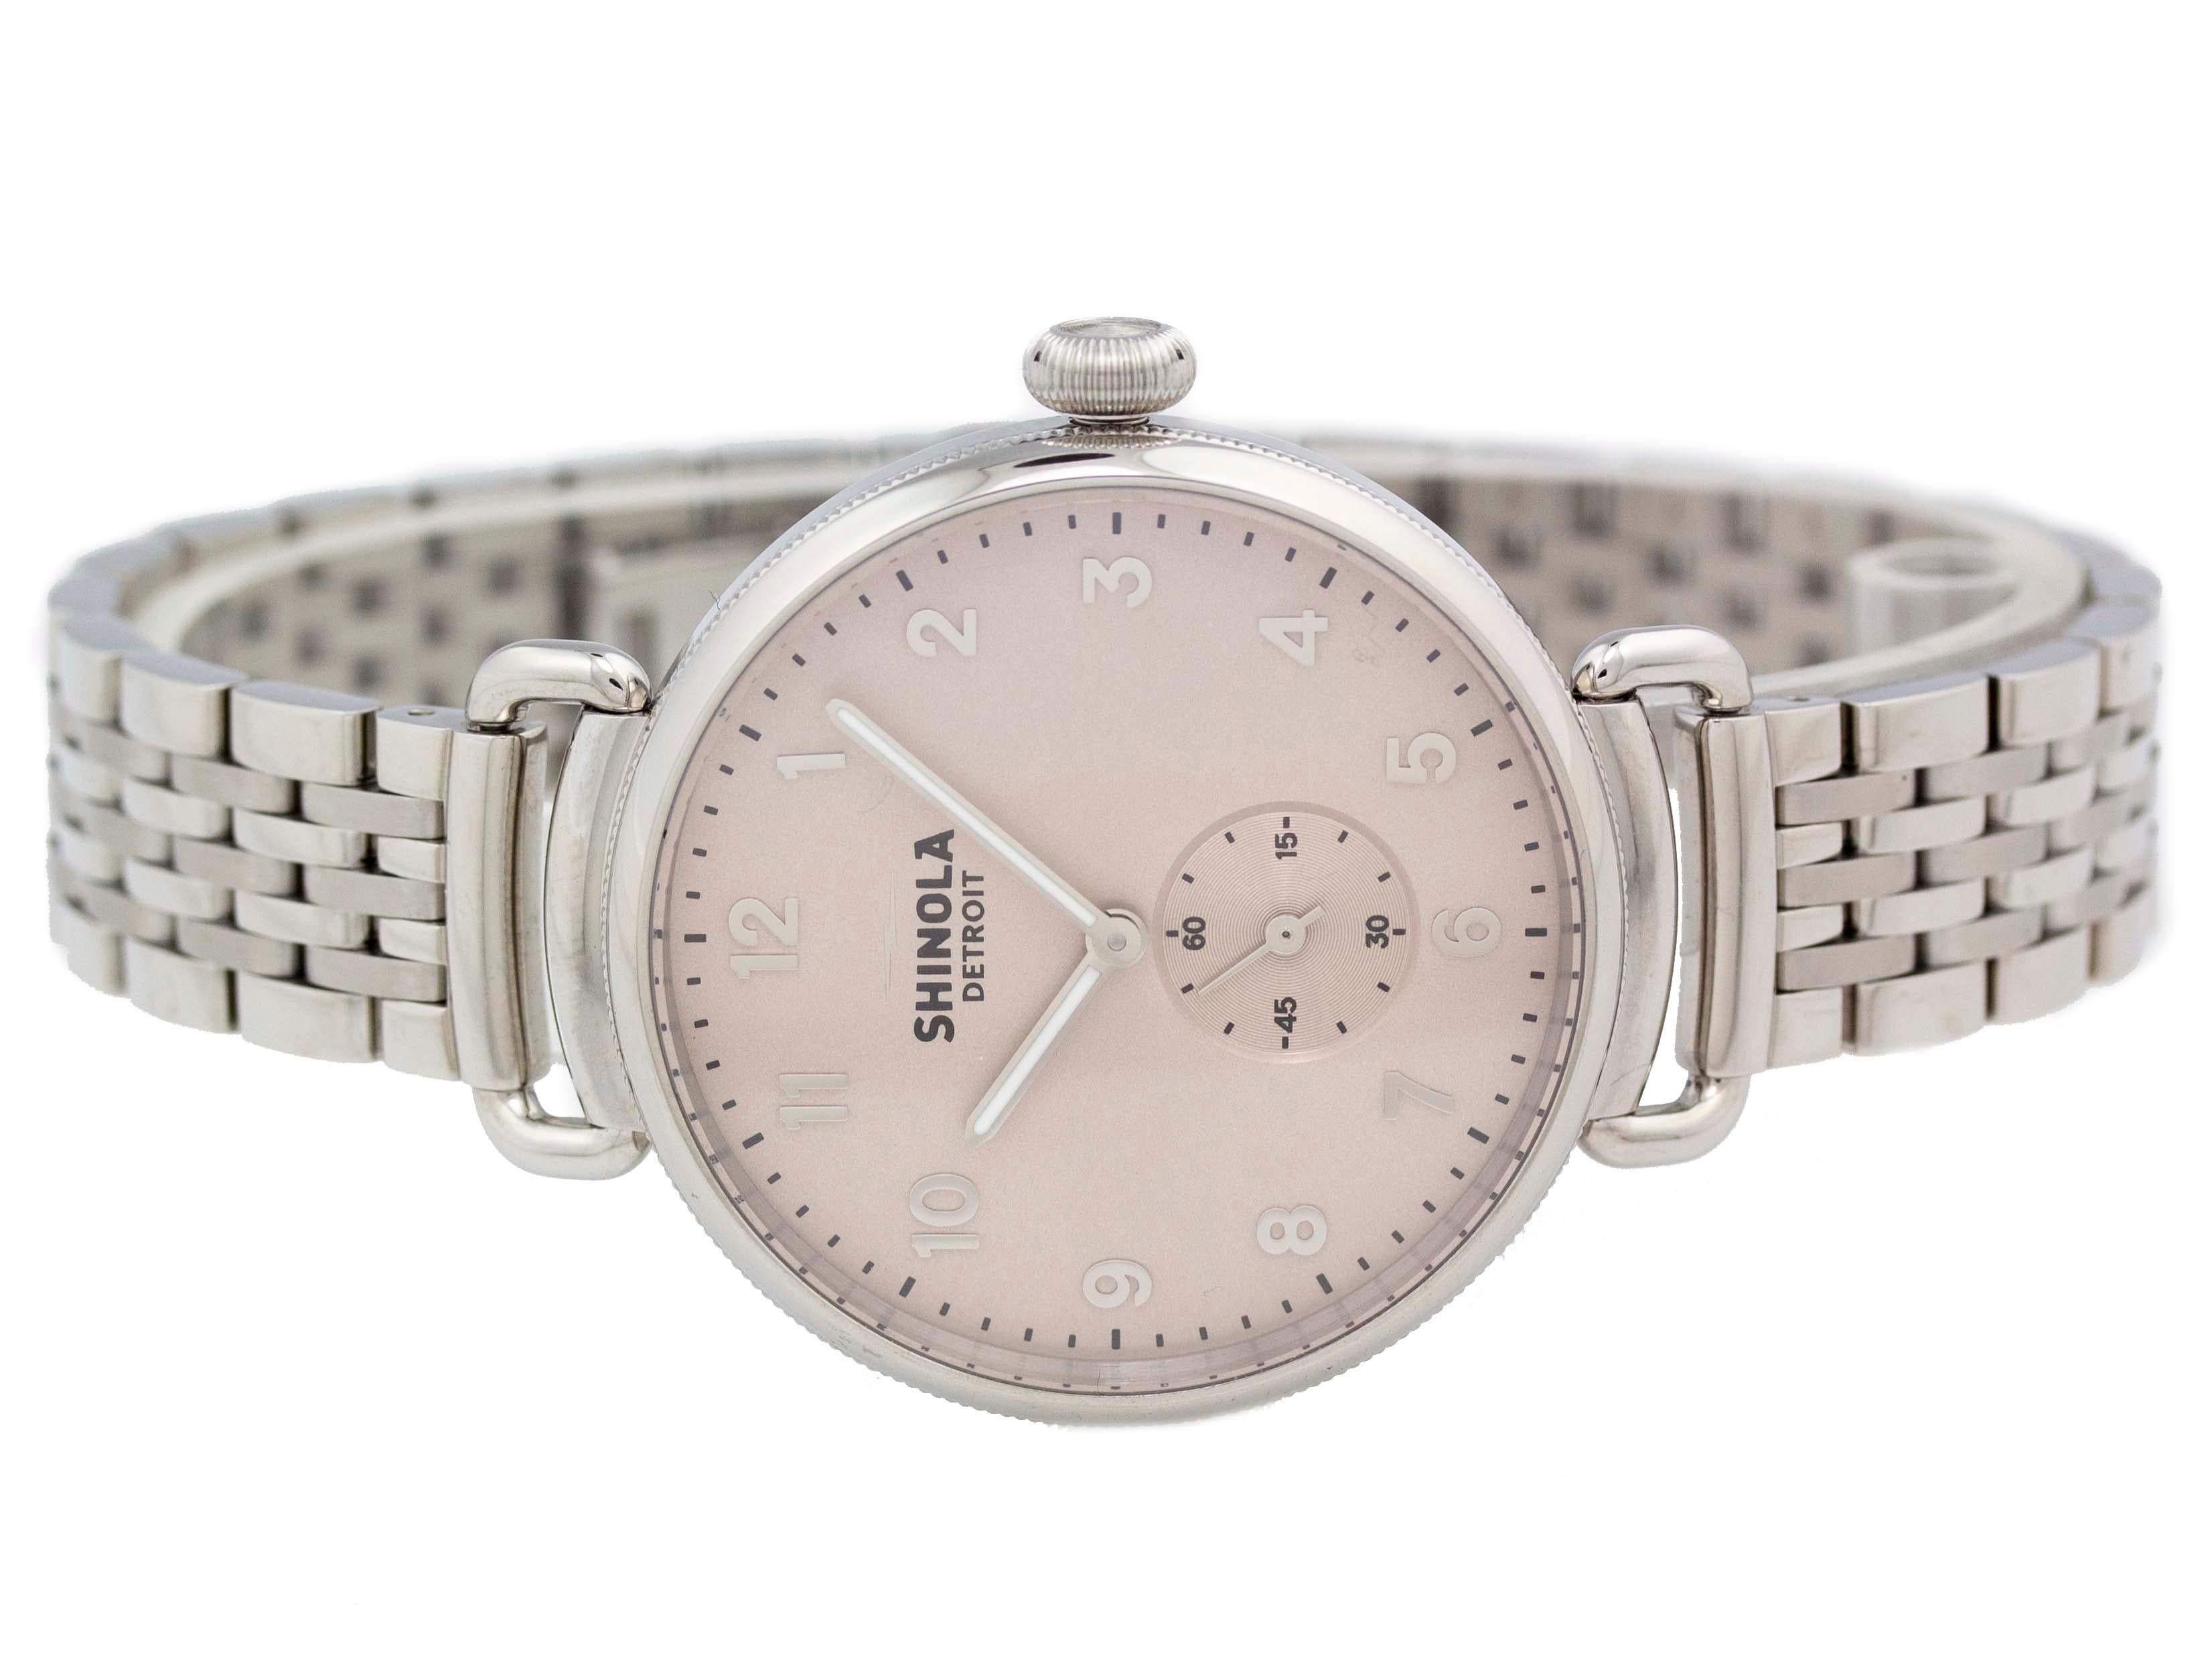 Brand	Shinola
Series	The Canfield
Model	20004466
Gender	Women's
Condition	Great Display Model, Light Scratches on Bezel, Case, & Bracelet
Material	Stainless